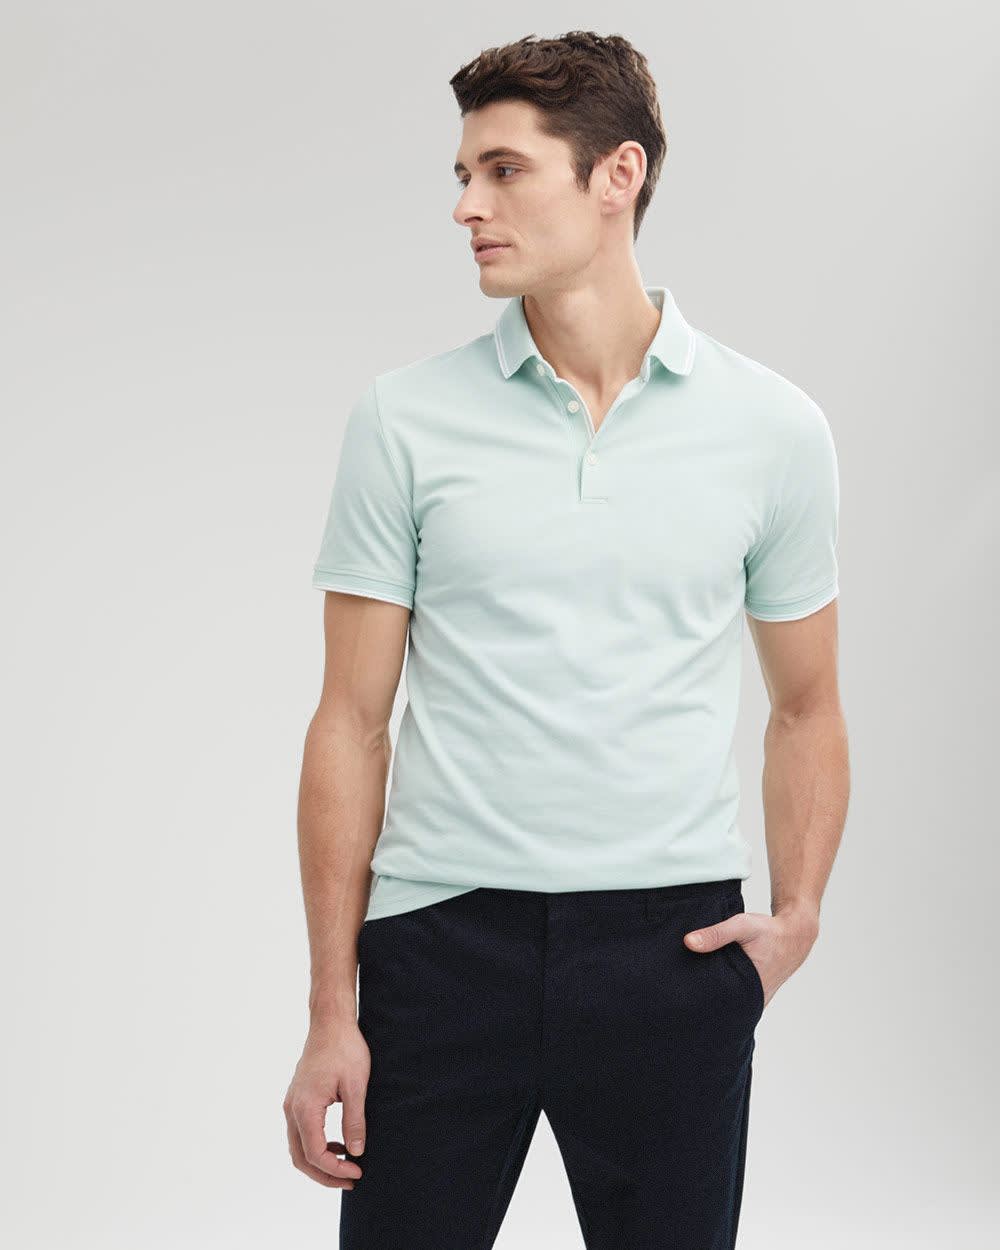 Short Sleeve Coolmax (R) Pique Polo with Coloured Accents | RW&CO.